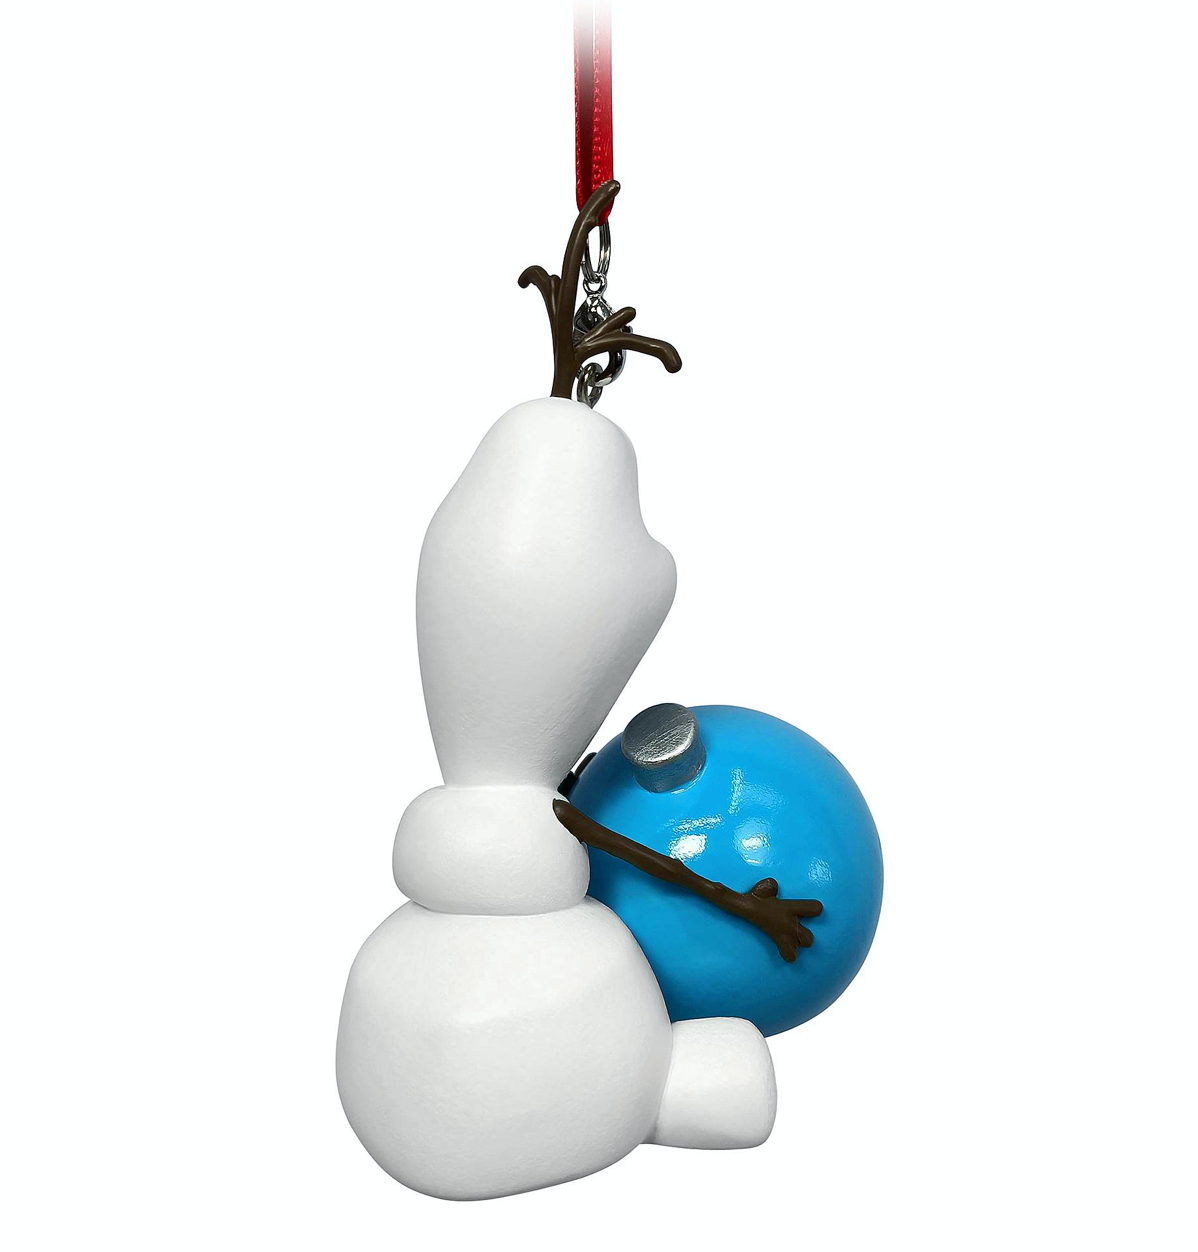 Disney Parks Frozen Olaf with Ball Ornament Christmas Ornament New with Tag